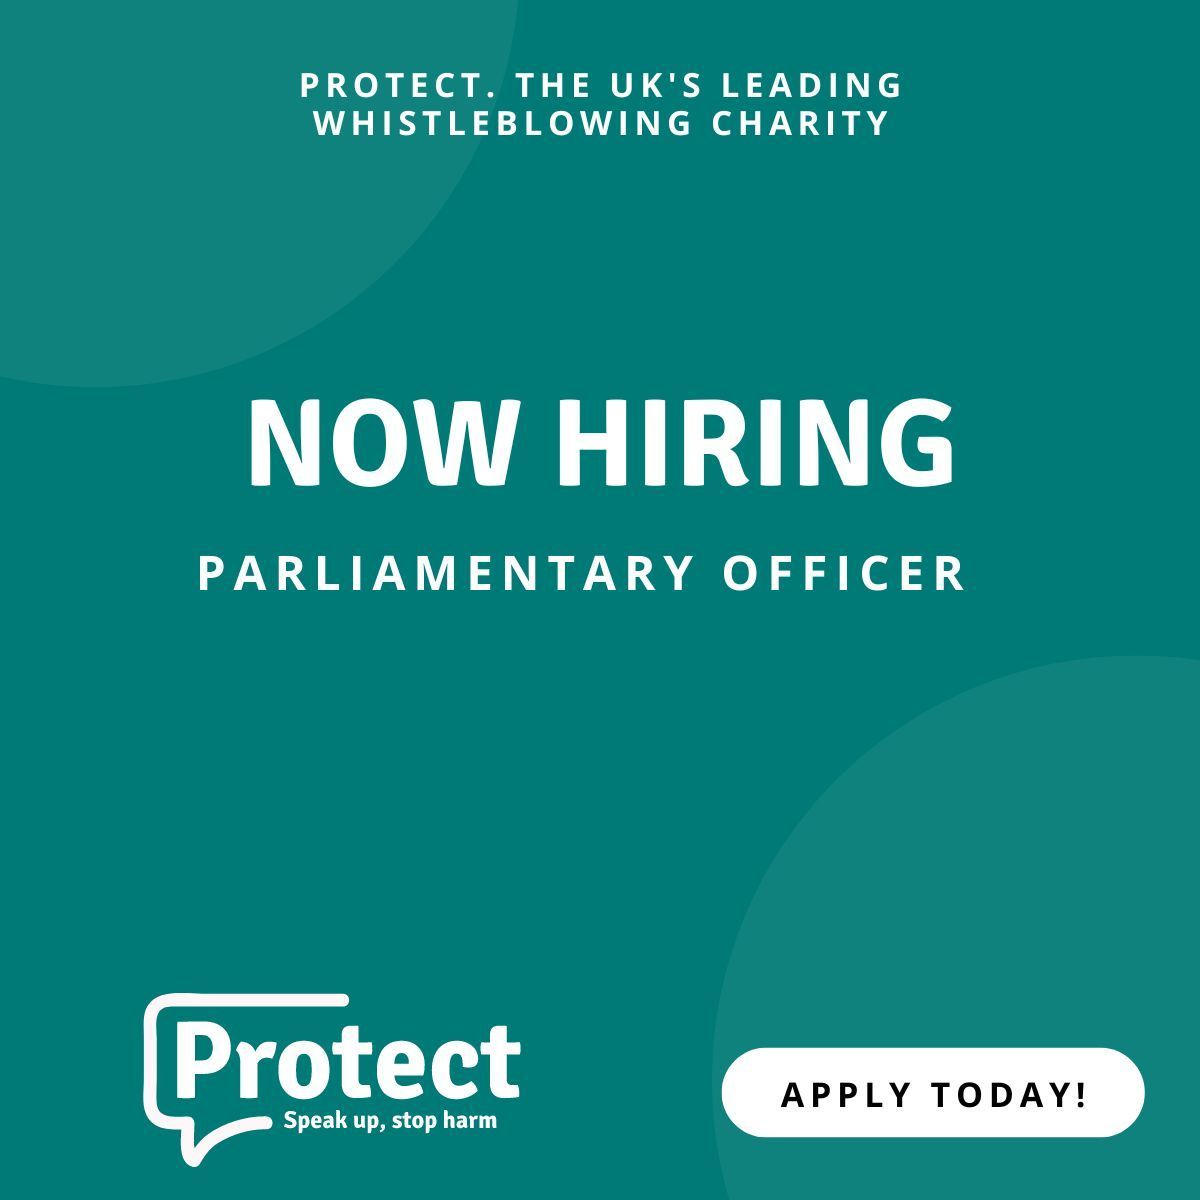 We are looking for a Parliamentary Officer to join our dynamic team. The role will entail advocating Protect's policy aims with MPs, Peers and officials in Whitehall, driving tangible change and supporting the rights of whistleblowers across the UK! buff.ly/3WG2Kq6